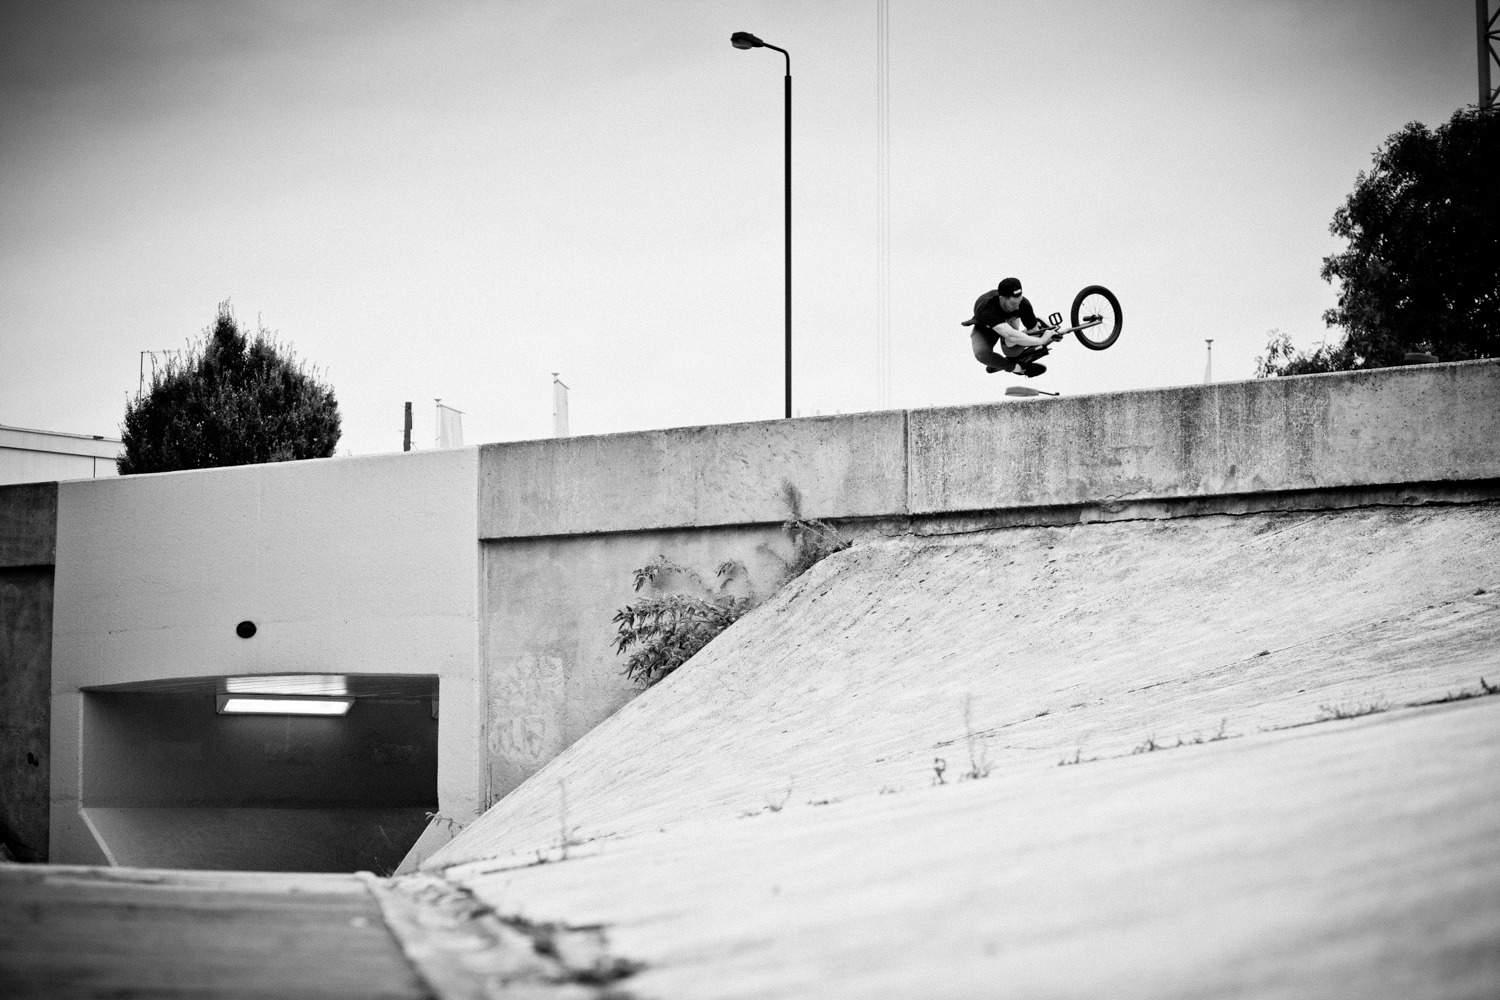 I would say that there have been quite a few photos of a wallride to table taken at this bank to wall at Wandsworth roundabout, but not everything has to be an 'NBD'. Not that Pete or myself give a shit. Pete Sawyer Bean refreshes your memory as to what a wallride table should look like anyway.